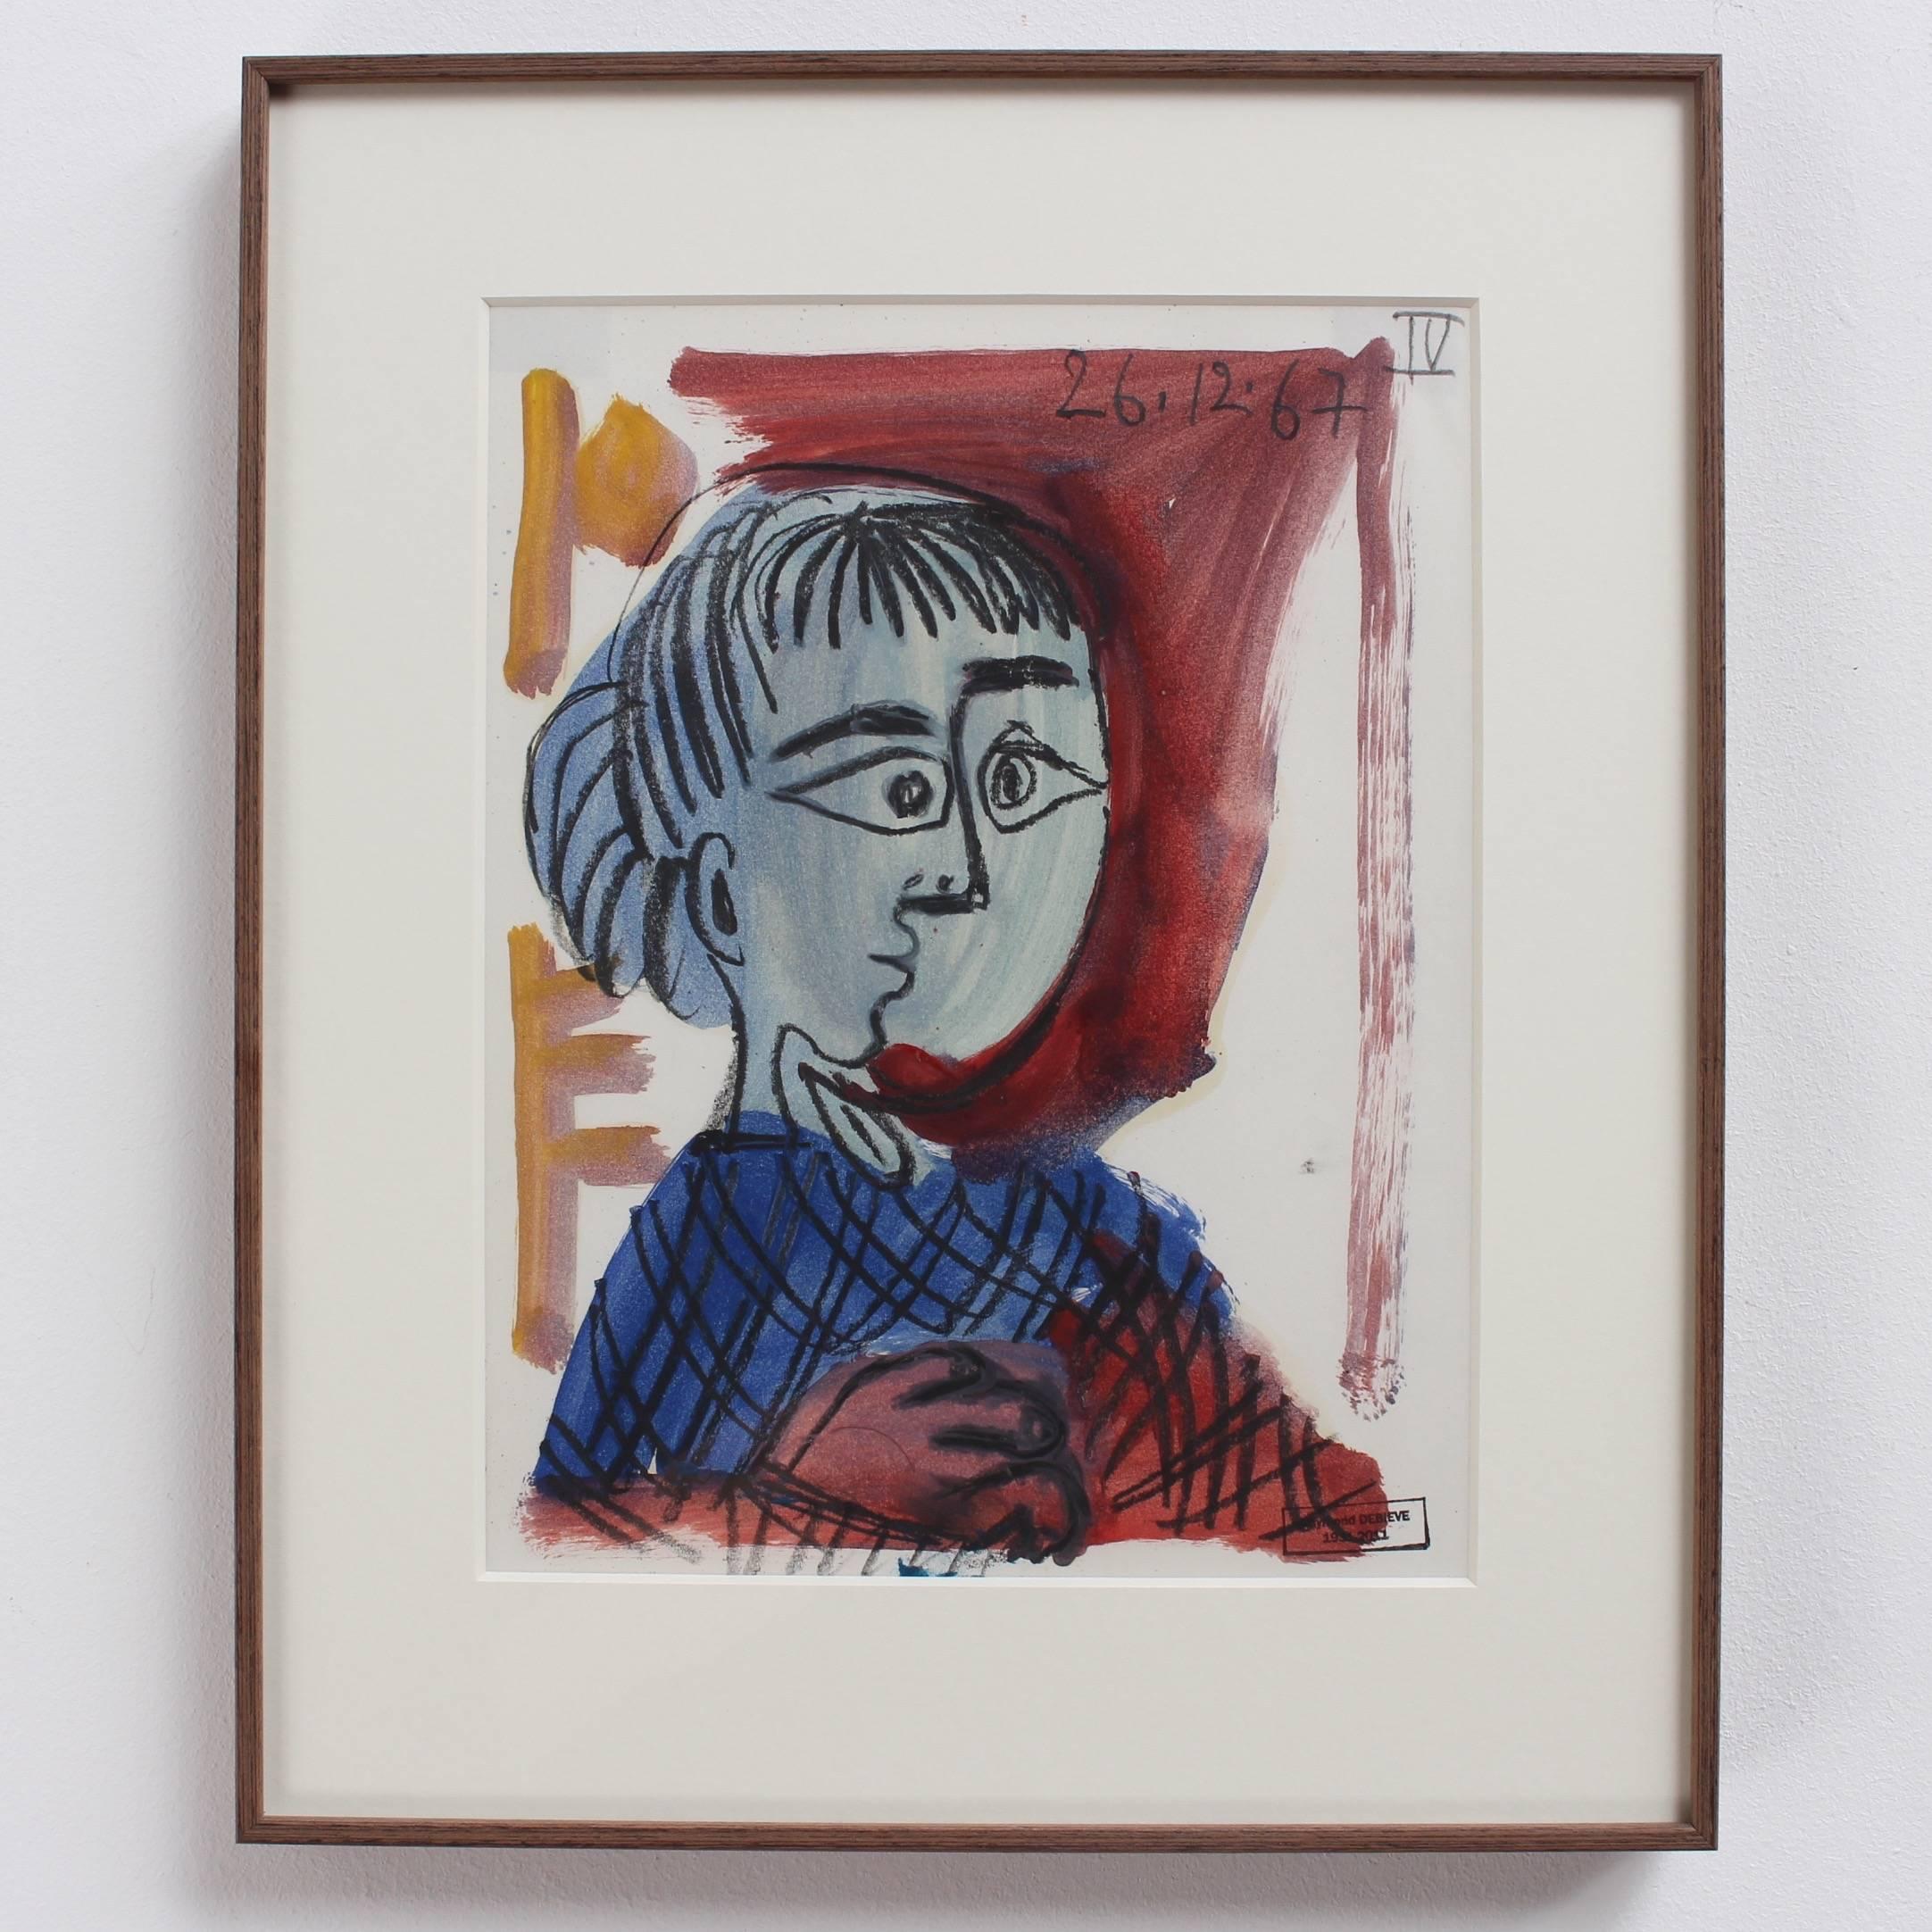 'Portrait of a Child', gouache and crayon on fine paper (1967), by Raymond Dèbieve (1931 - 2011). Here the artist paints a child in red and blue in his post-cubist style. Clearly this is an affectionately-created portrait of someone close to him.